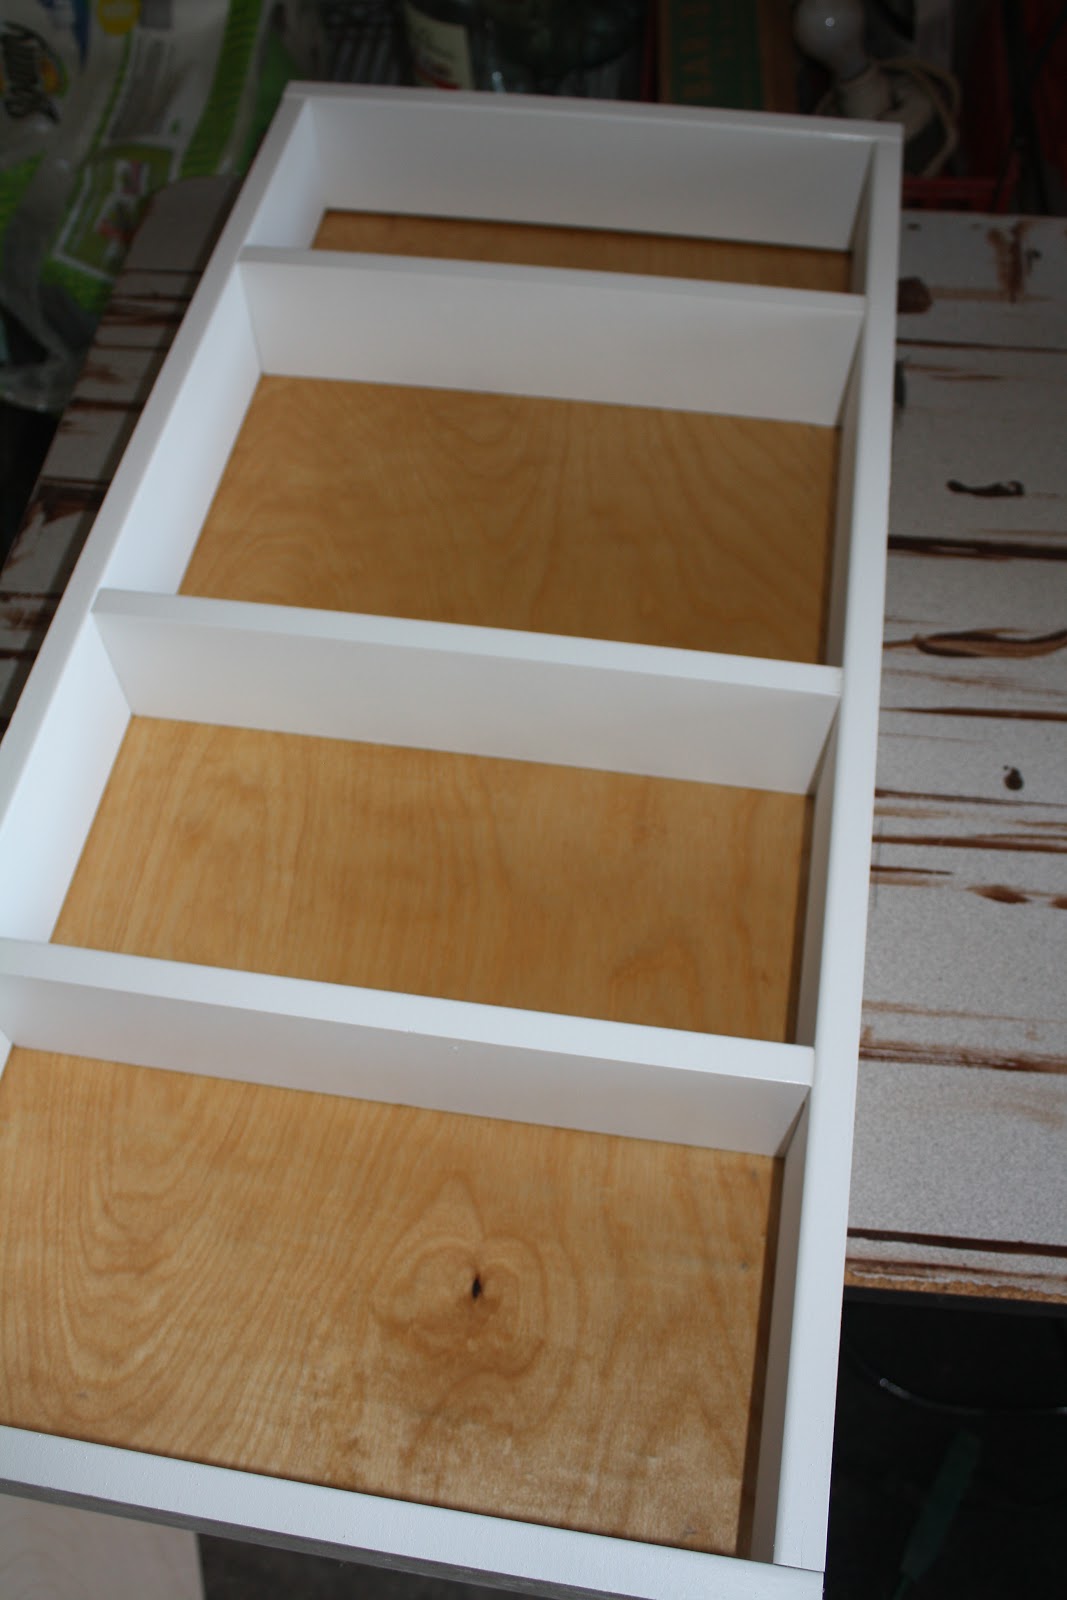 Passions and Pastimes: DIY recessed shelving - Part II